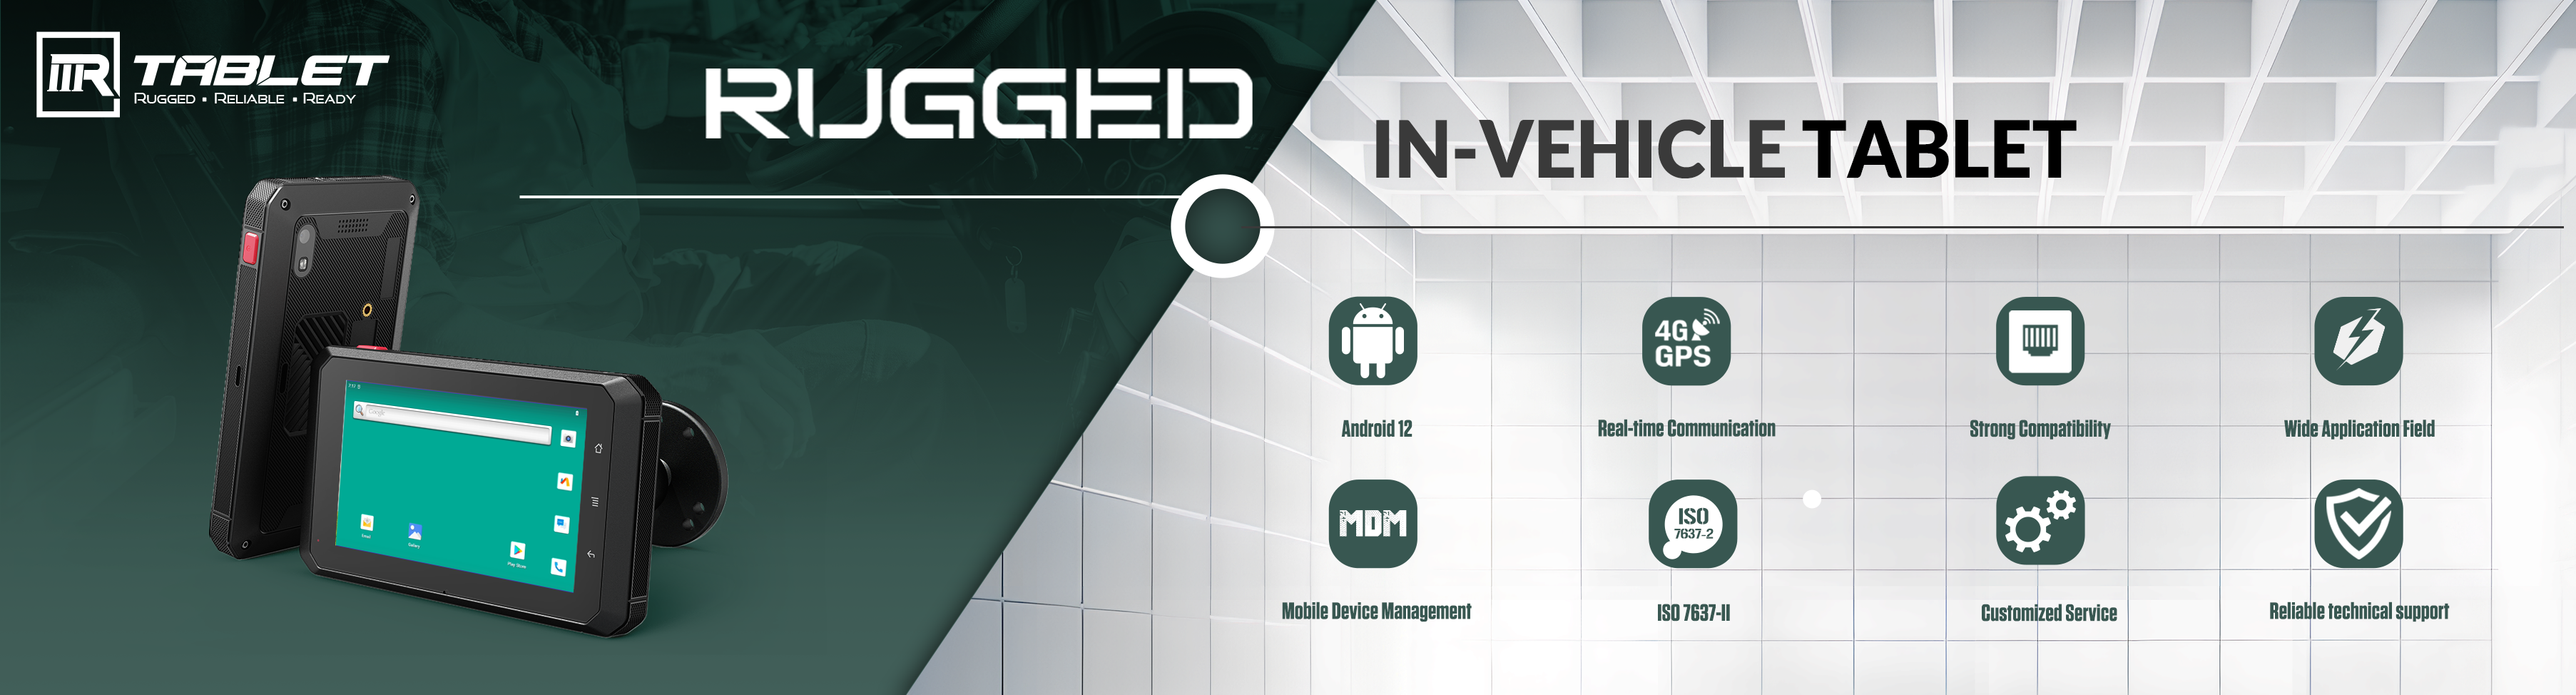 VT-5A: The Ultimate In-vehicle Tablet sareng Enhanced Connectivity and Performance